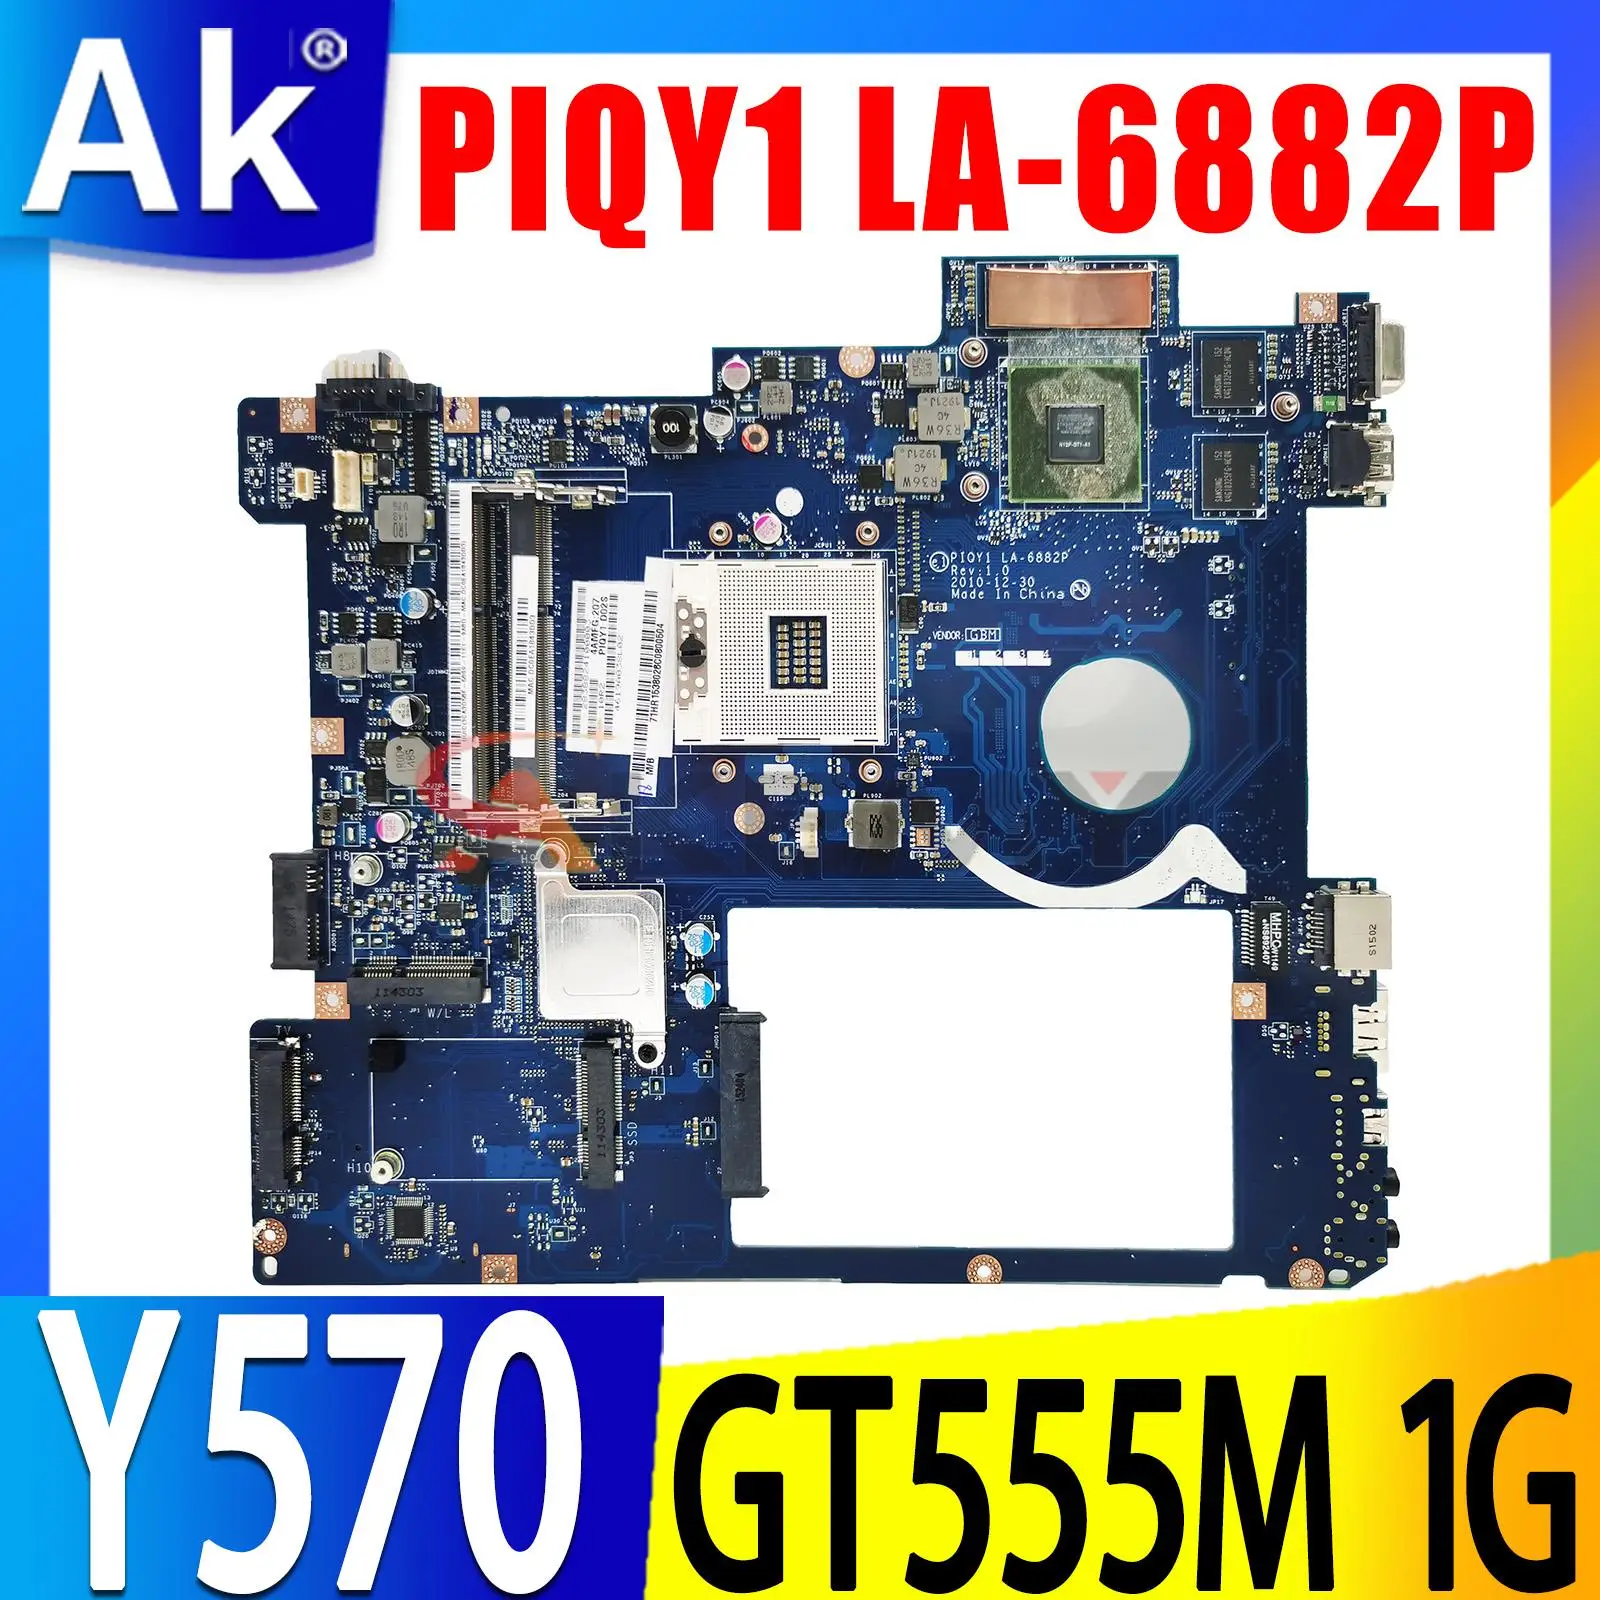 piqy1-la-6882p-for-lenovo-y570-laptop-motherboard-with-geforce-gt555m-1gb-graphics-card-mainboard